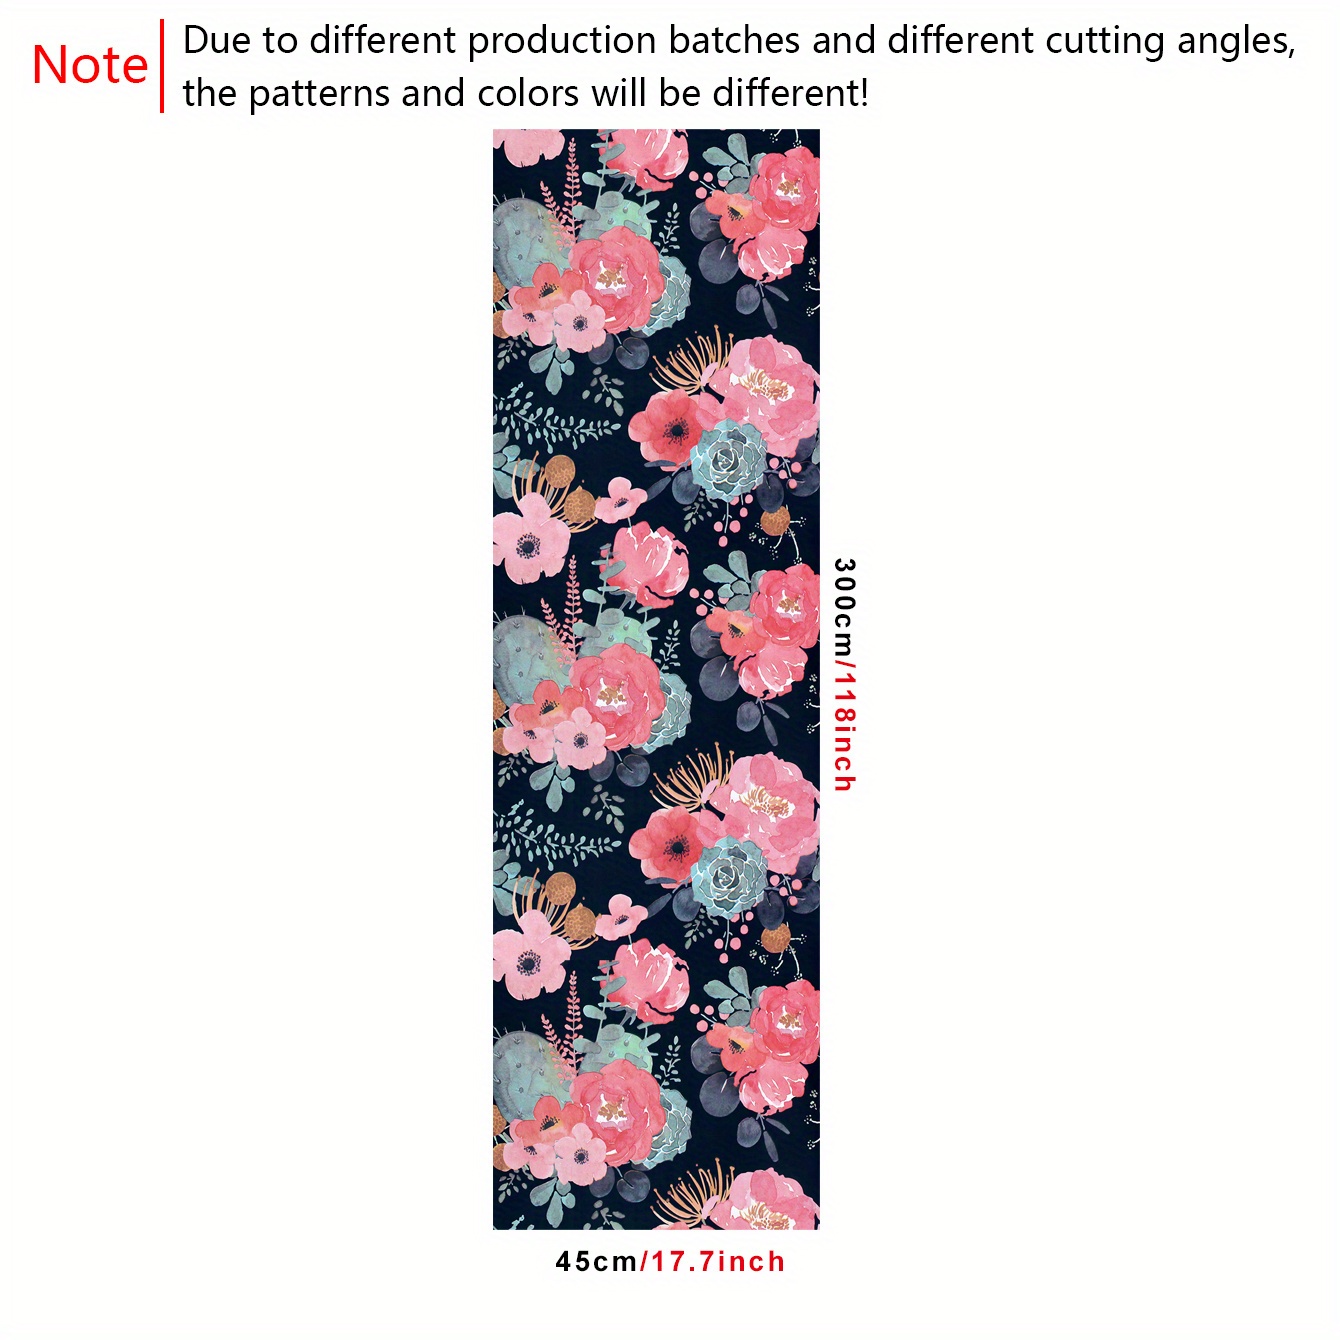 1PC, Thickened,Vintage, Dark Blue, Watercolor, Flowers, Green Plants, Removable, Waterproof ,Peel And Stick ,Wallpaper 39.4inchX17.7inch、118nchX17.7inch Refurbishment Wallpaper,39.4inchX17.7inch、118nchX17.7inch